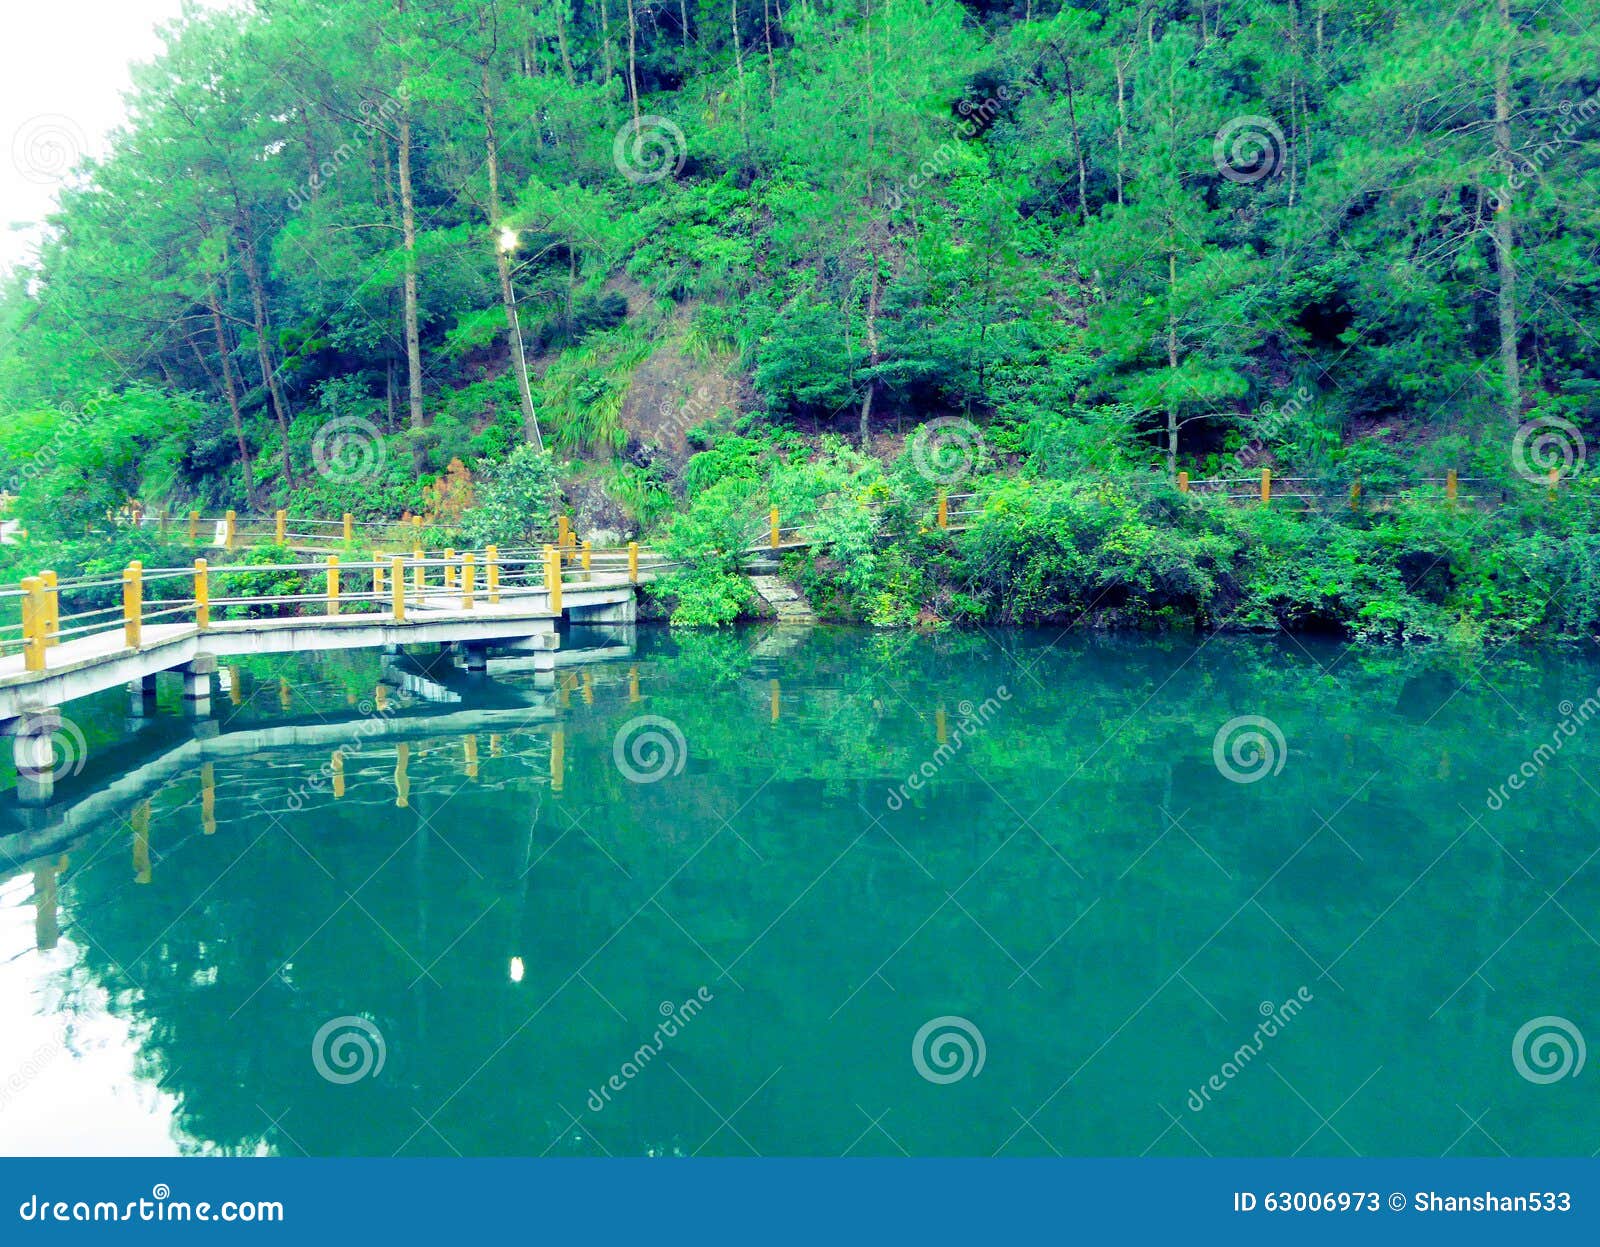 Corridor in forest park stock image. Image of lake, lishui - 63006973